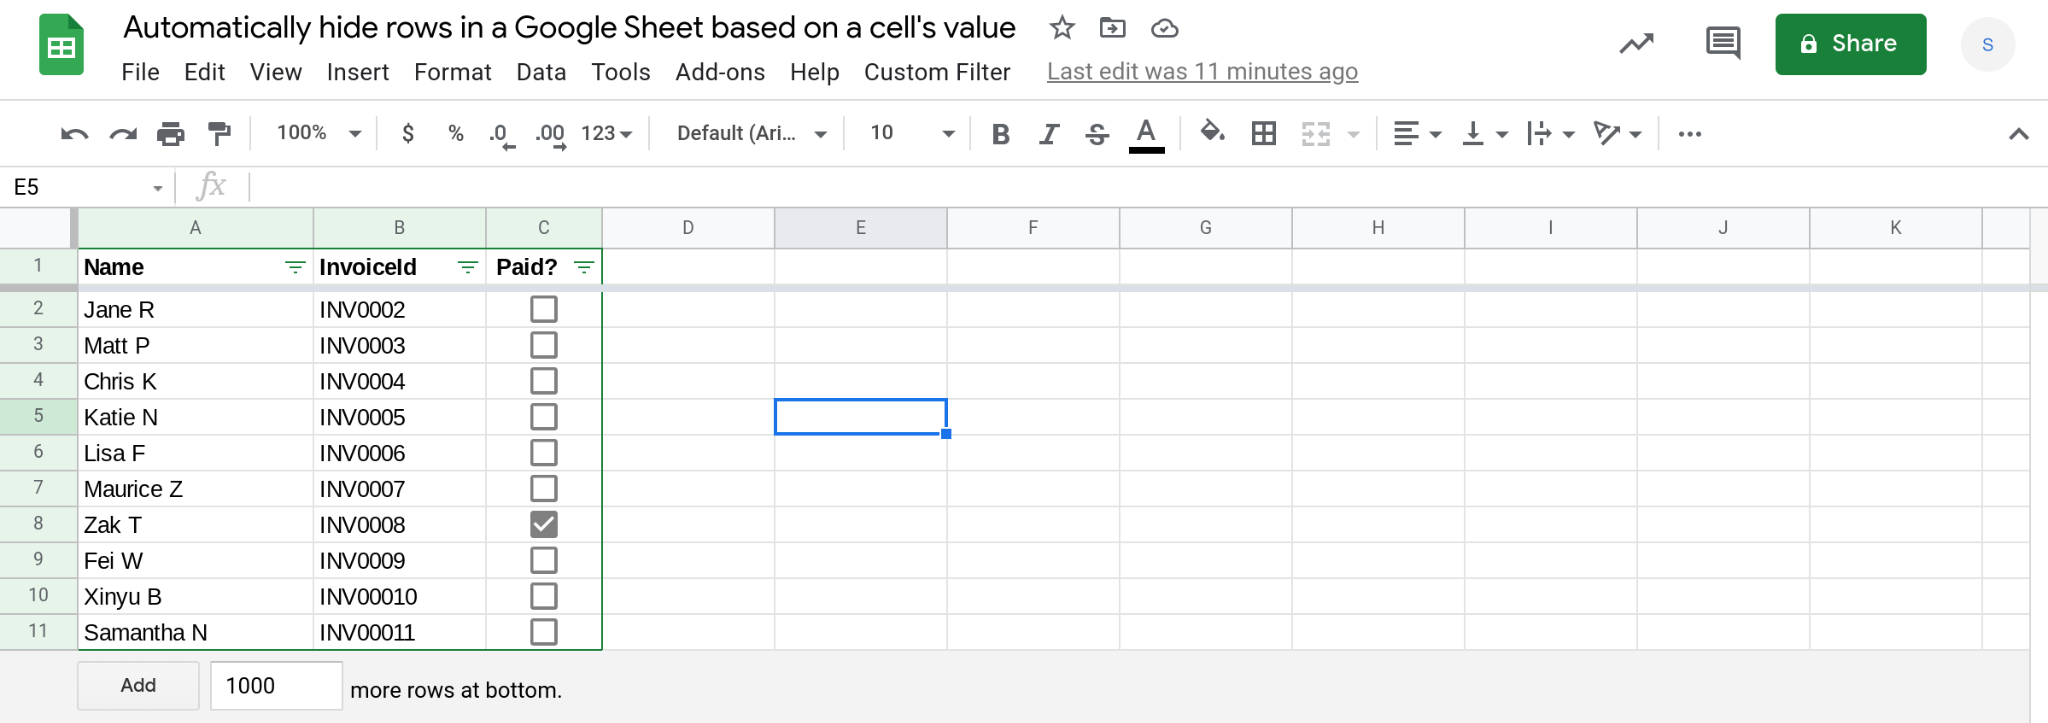 Hide rows based on cell value in Sheets using Apps Script